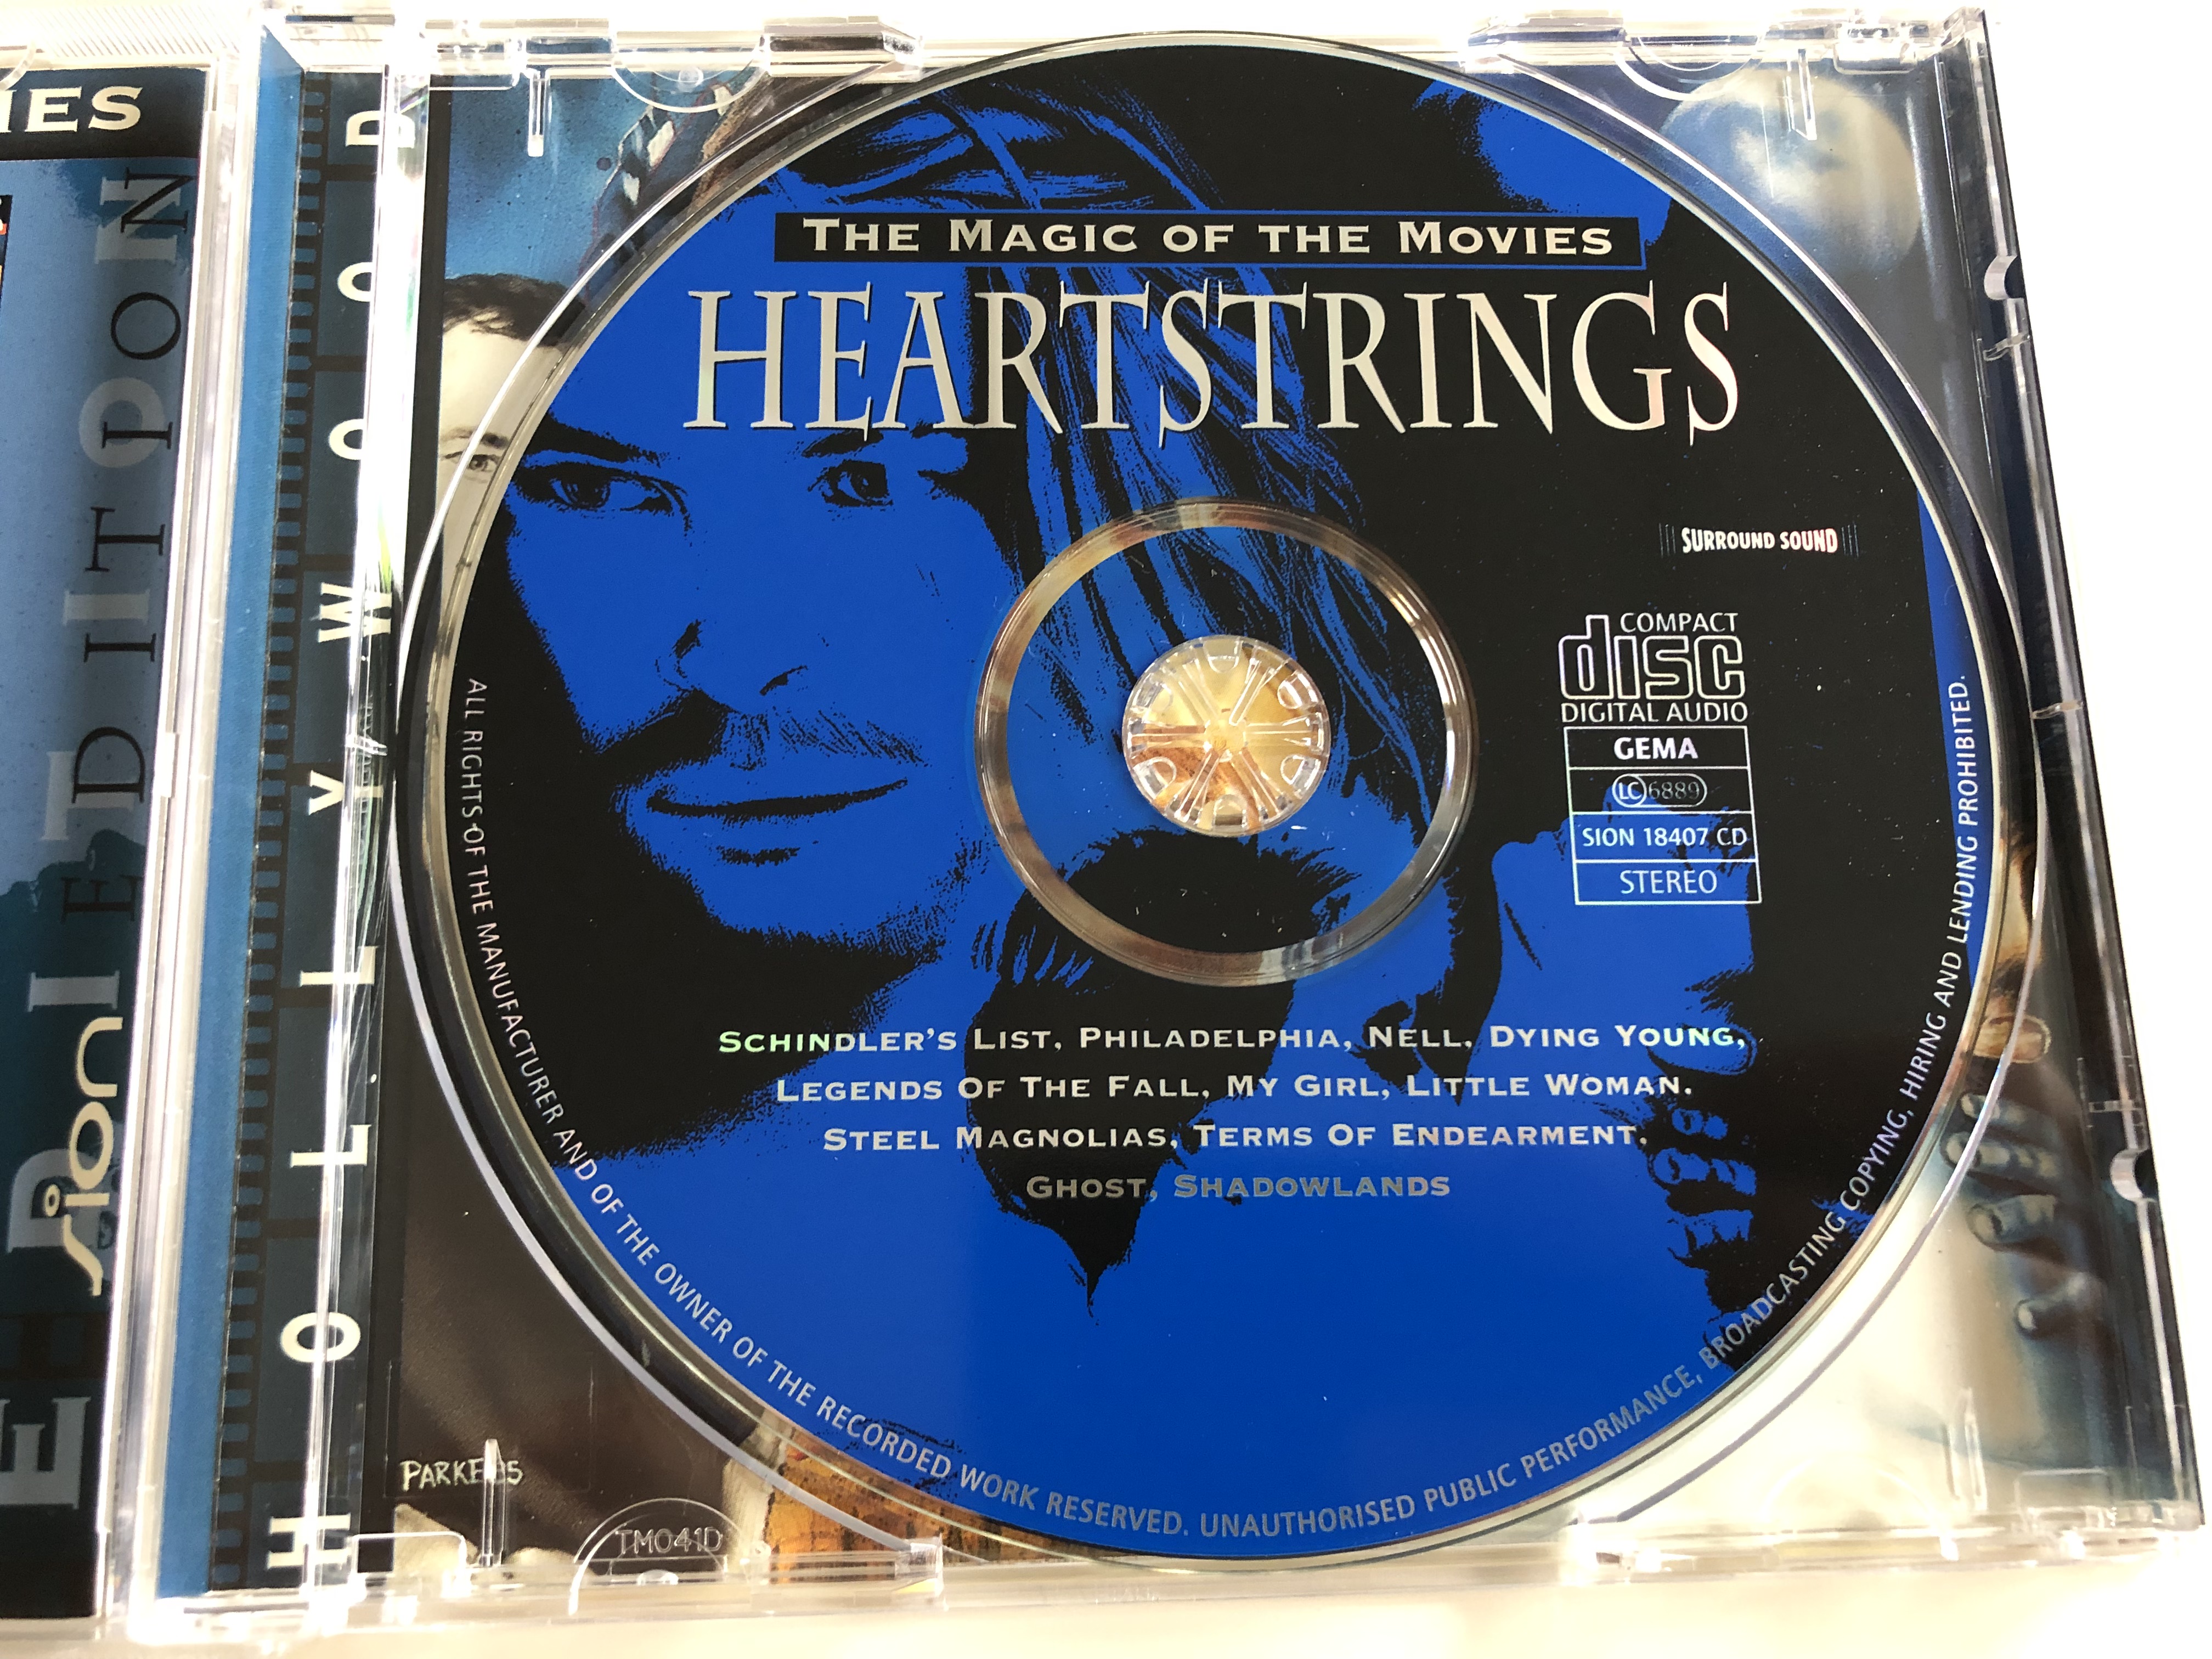 the-magic-of-the-movies-heartstrings-schindler-s-list-philadelphia-nell-dying-young-legends-of-the-fall-ghost-shadowlands-sion-18407-cd-digital-surround-sound-audio-cd-1997-2-.jpg